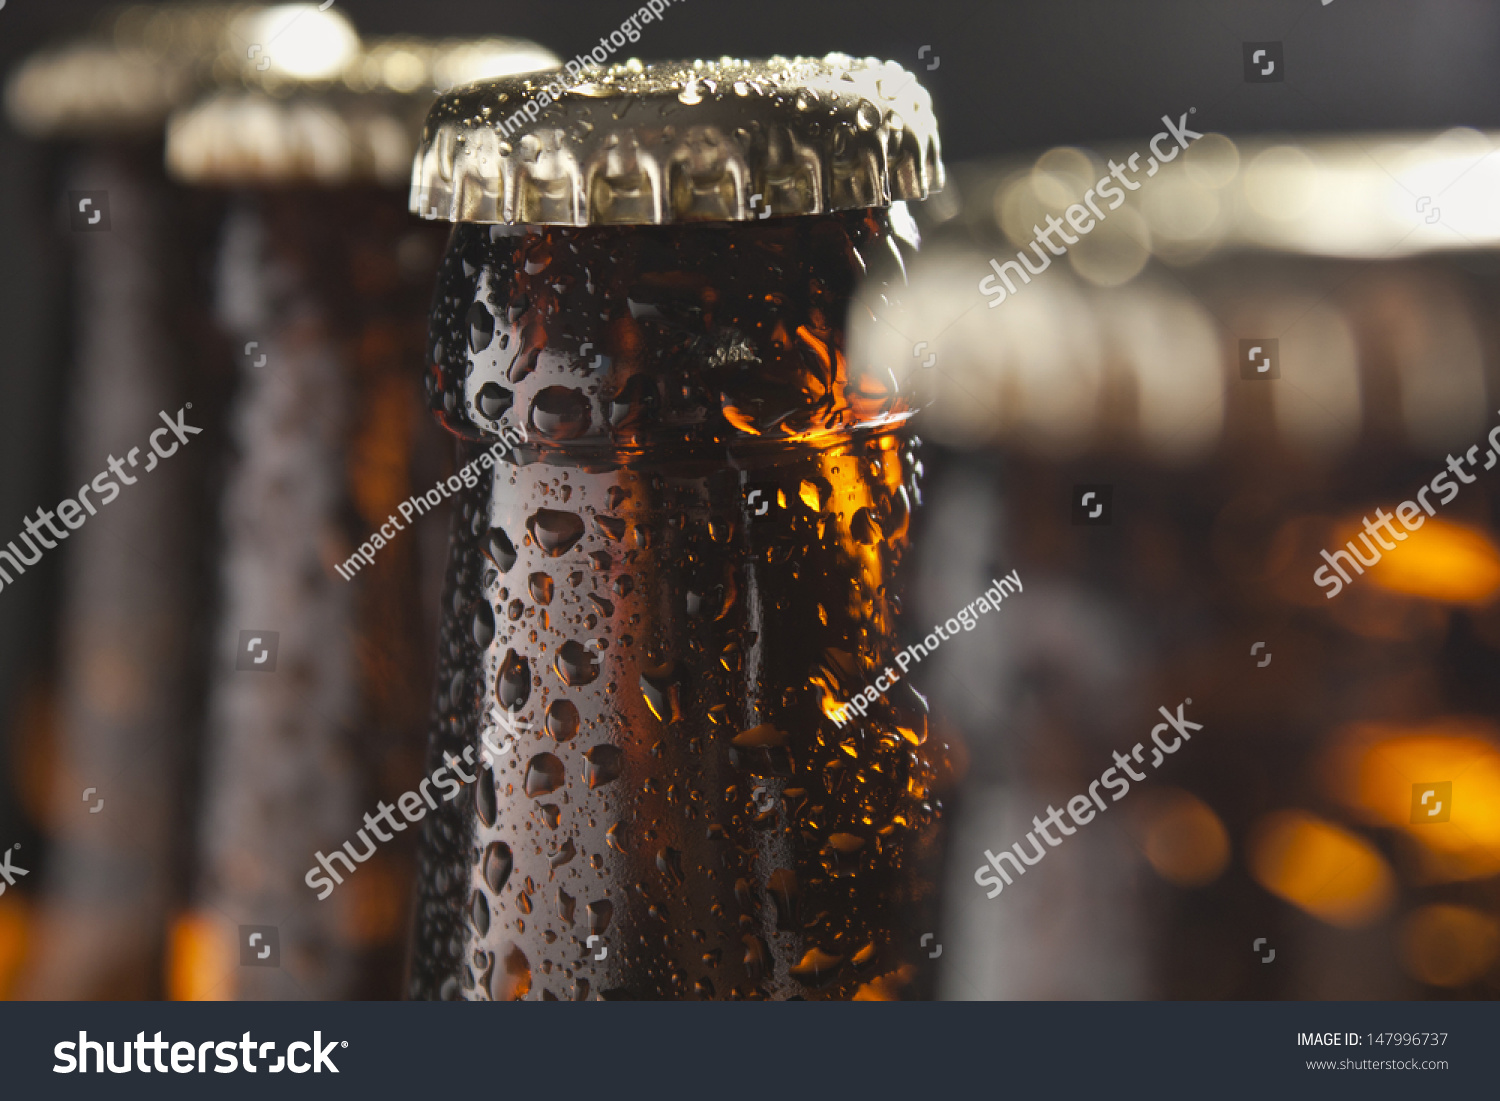 The group of wet bottles of beer #147996737